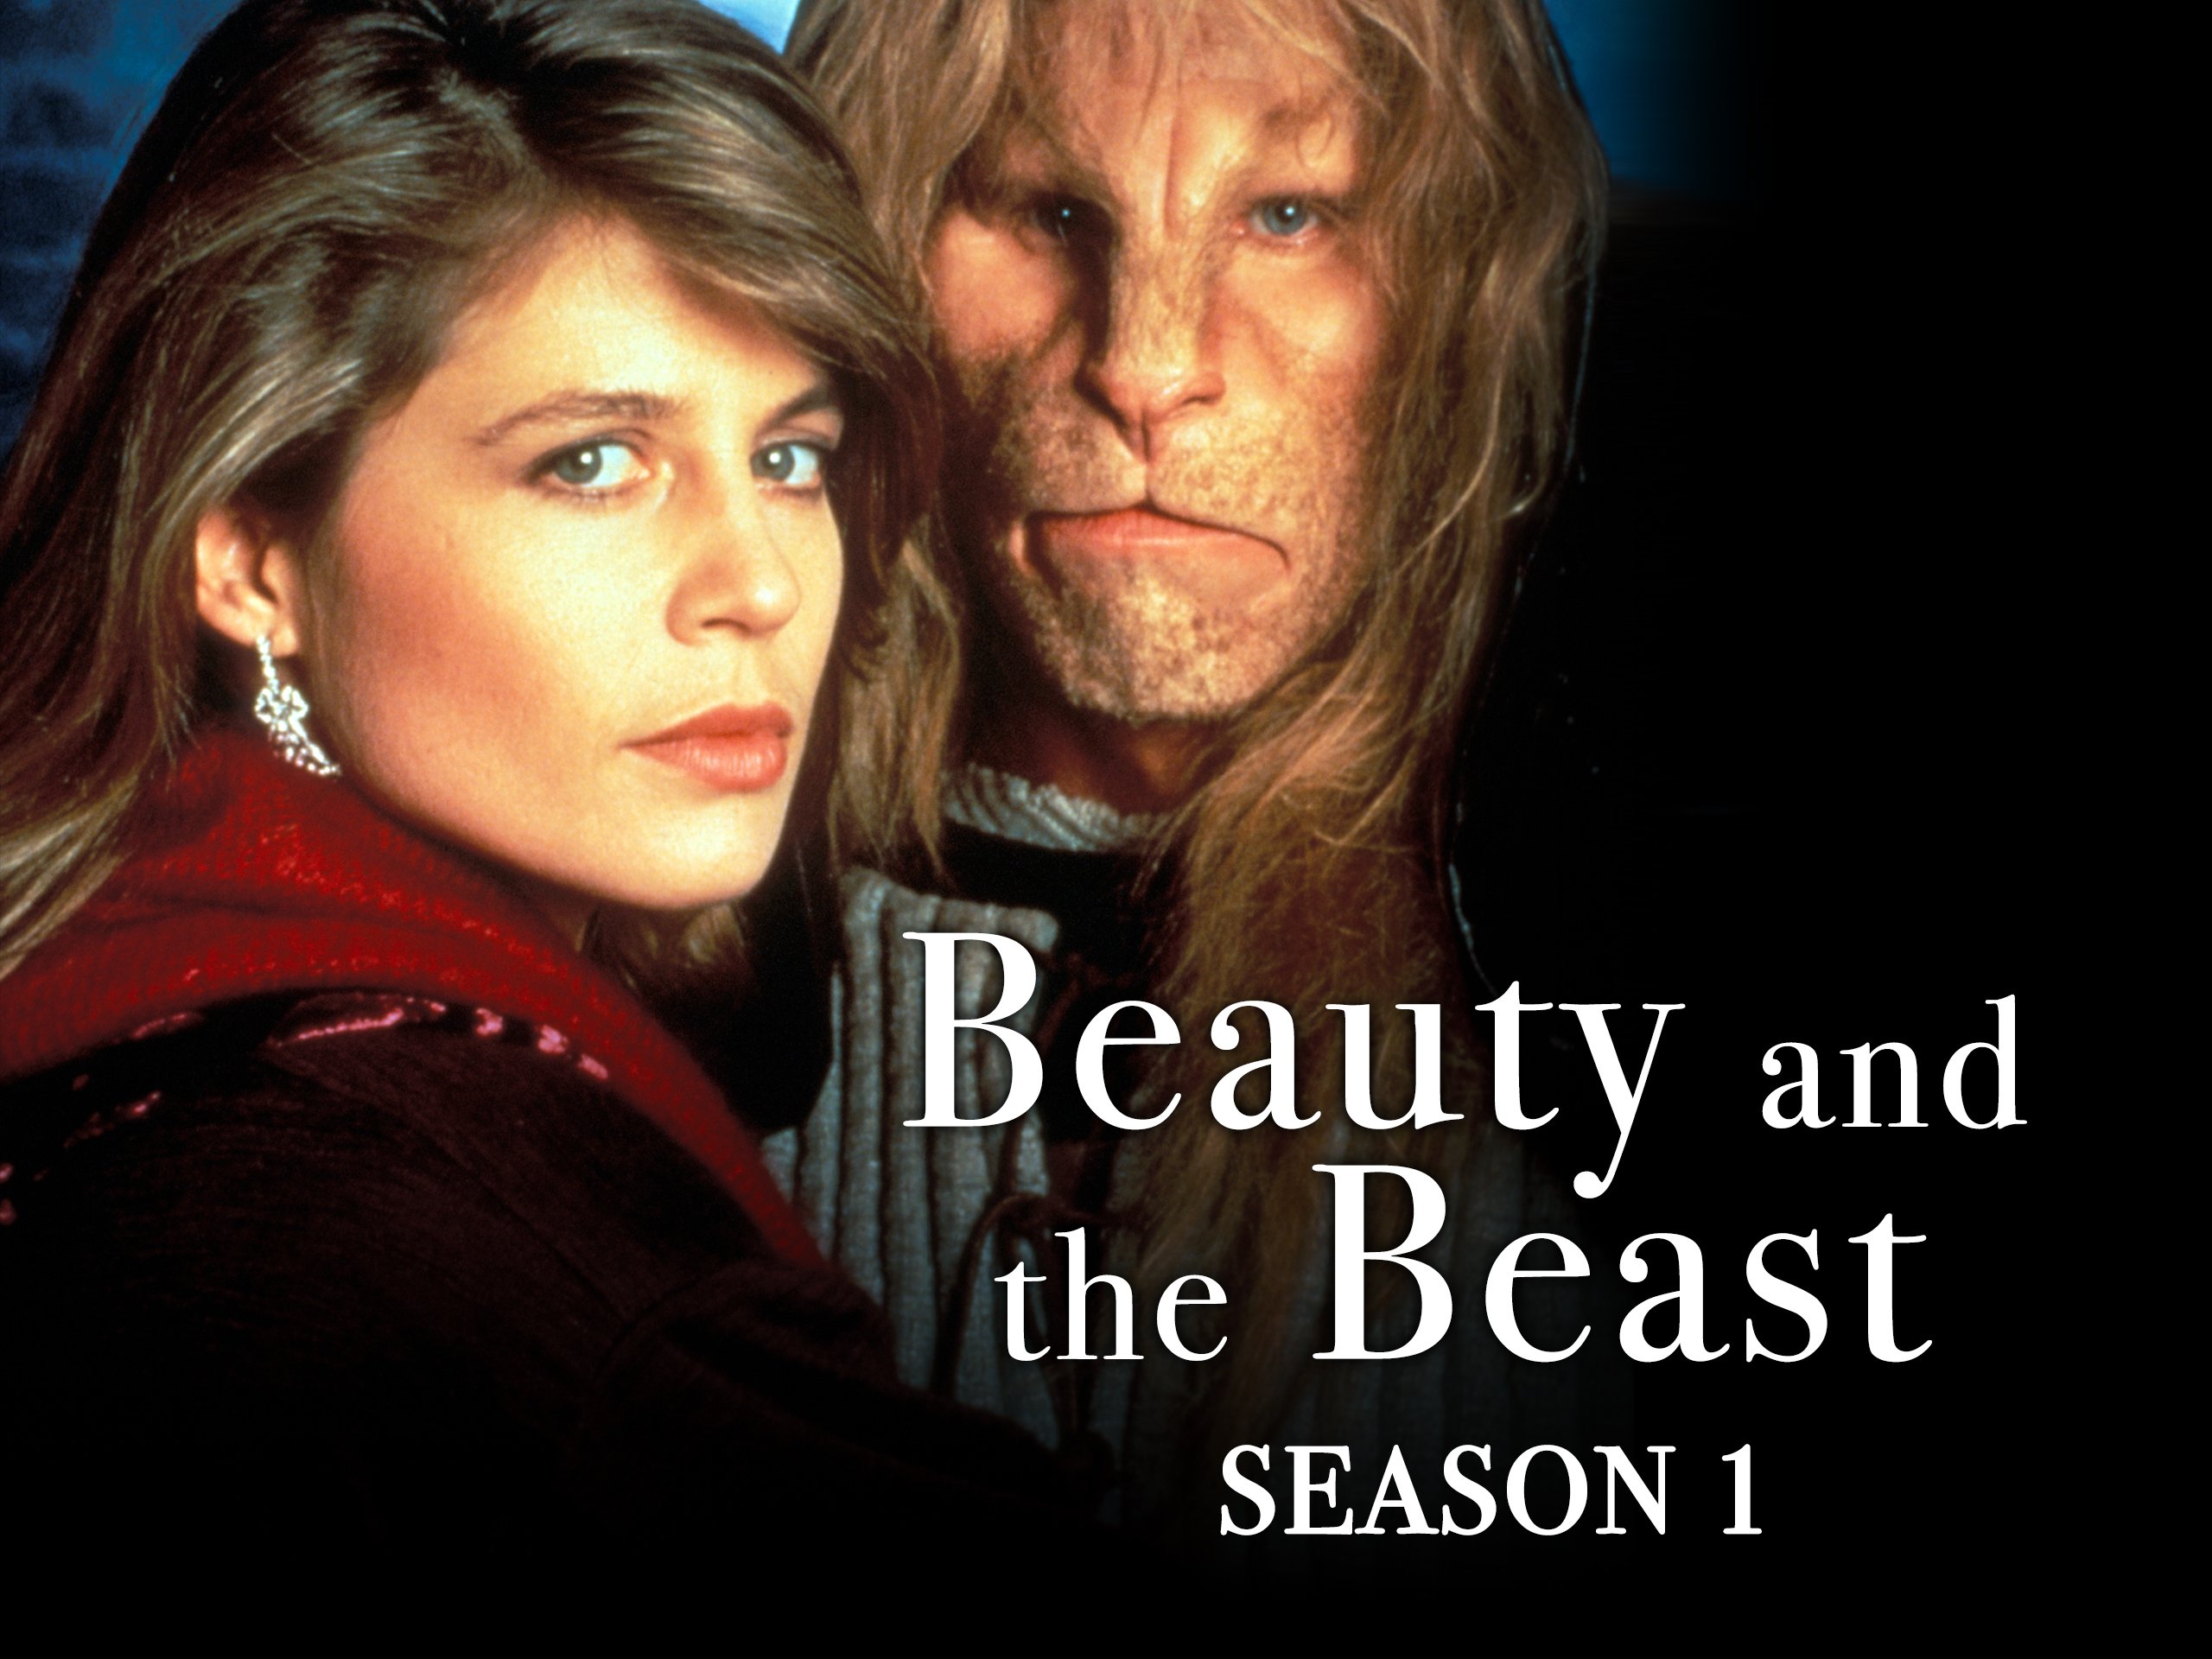 The Beauty and the Beast 1987 TV Series: A Timeless Classic